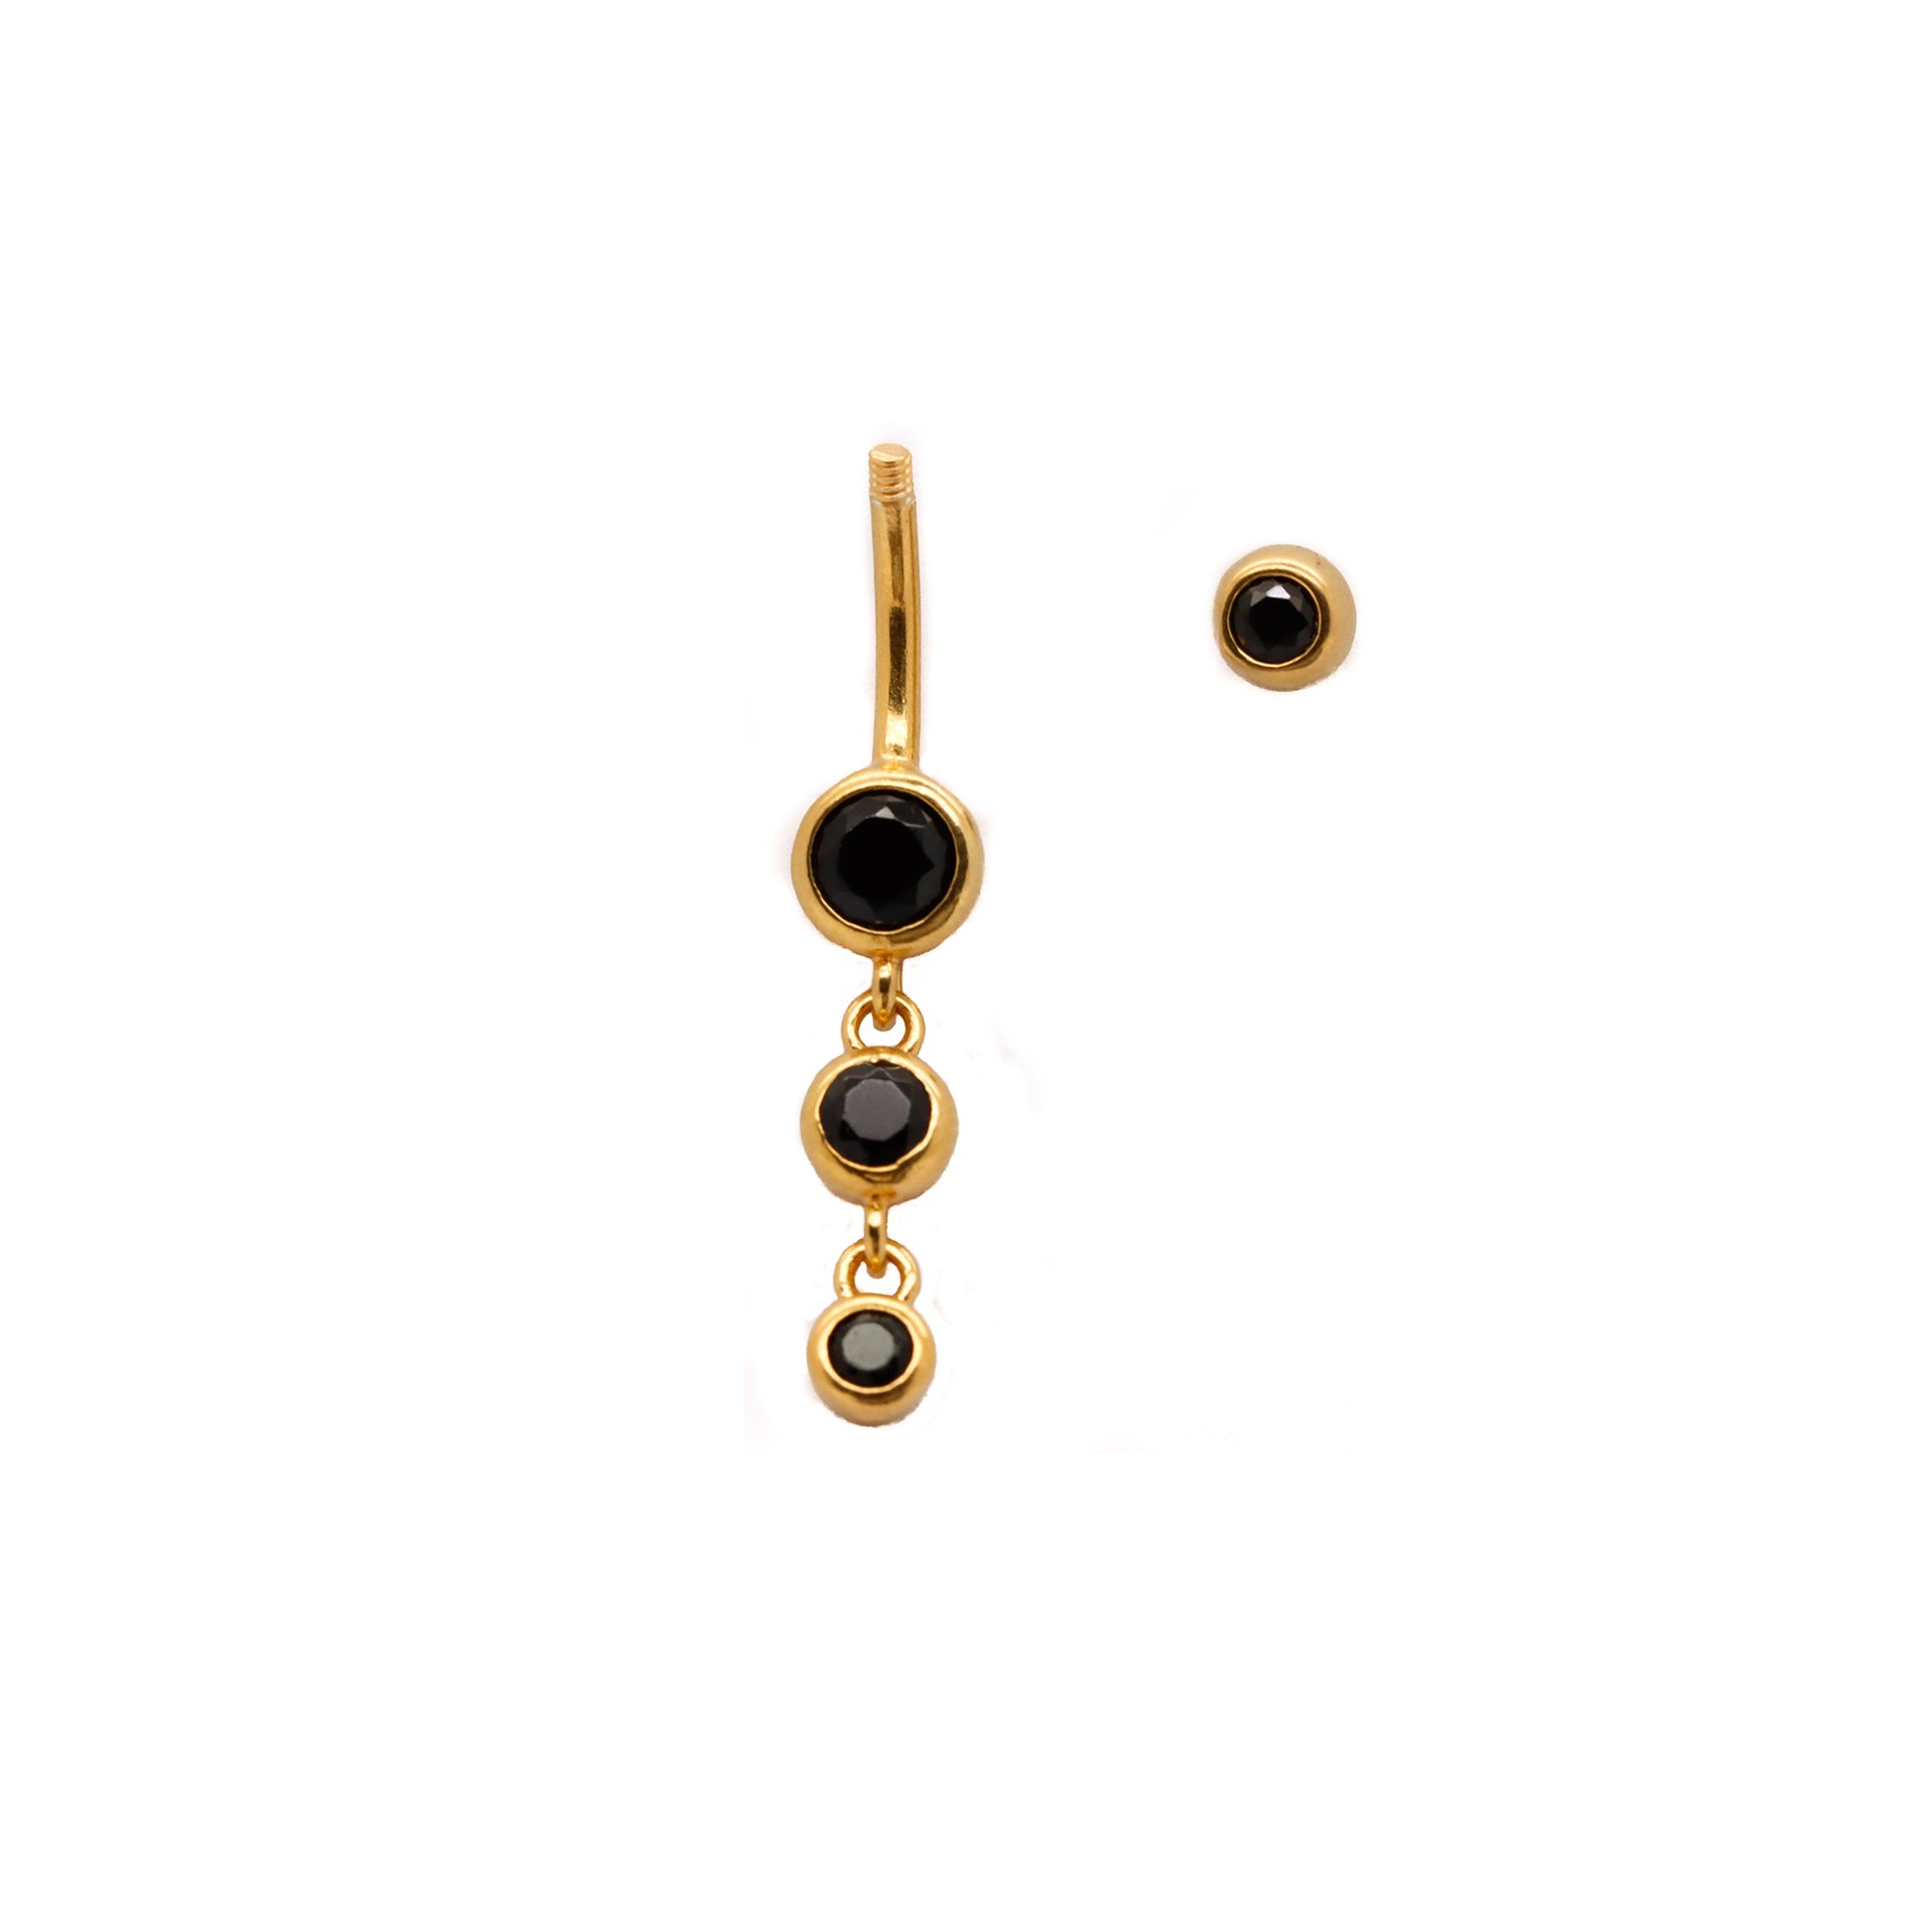 Vermeil | 925 Silver 24k Gold Coated Black CZ Triple Charm Dangle Belly Ring | 14G 6mm 1/4" 8mm 5/16" 10mm 3/8" - Sturdy South